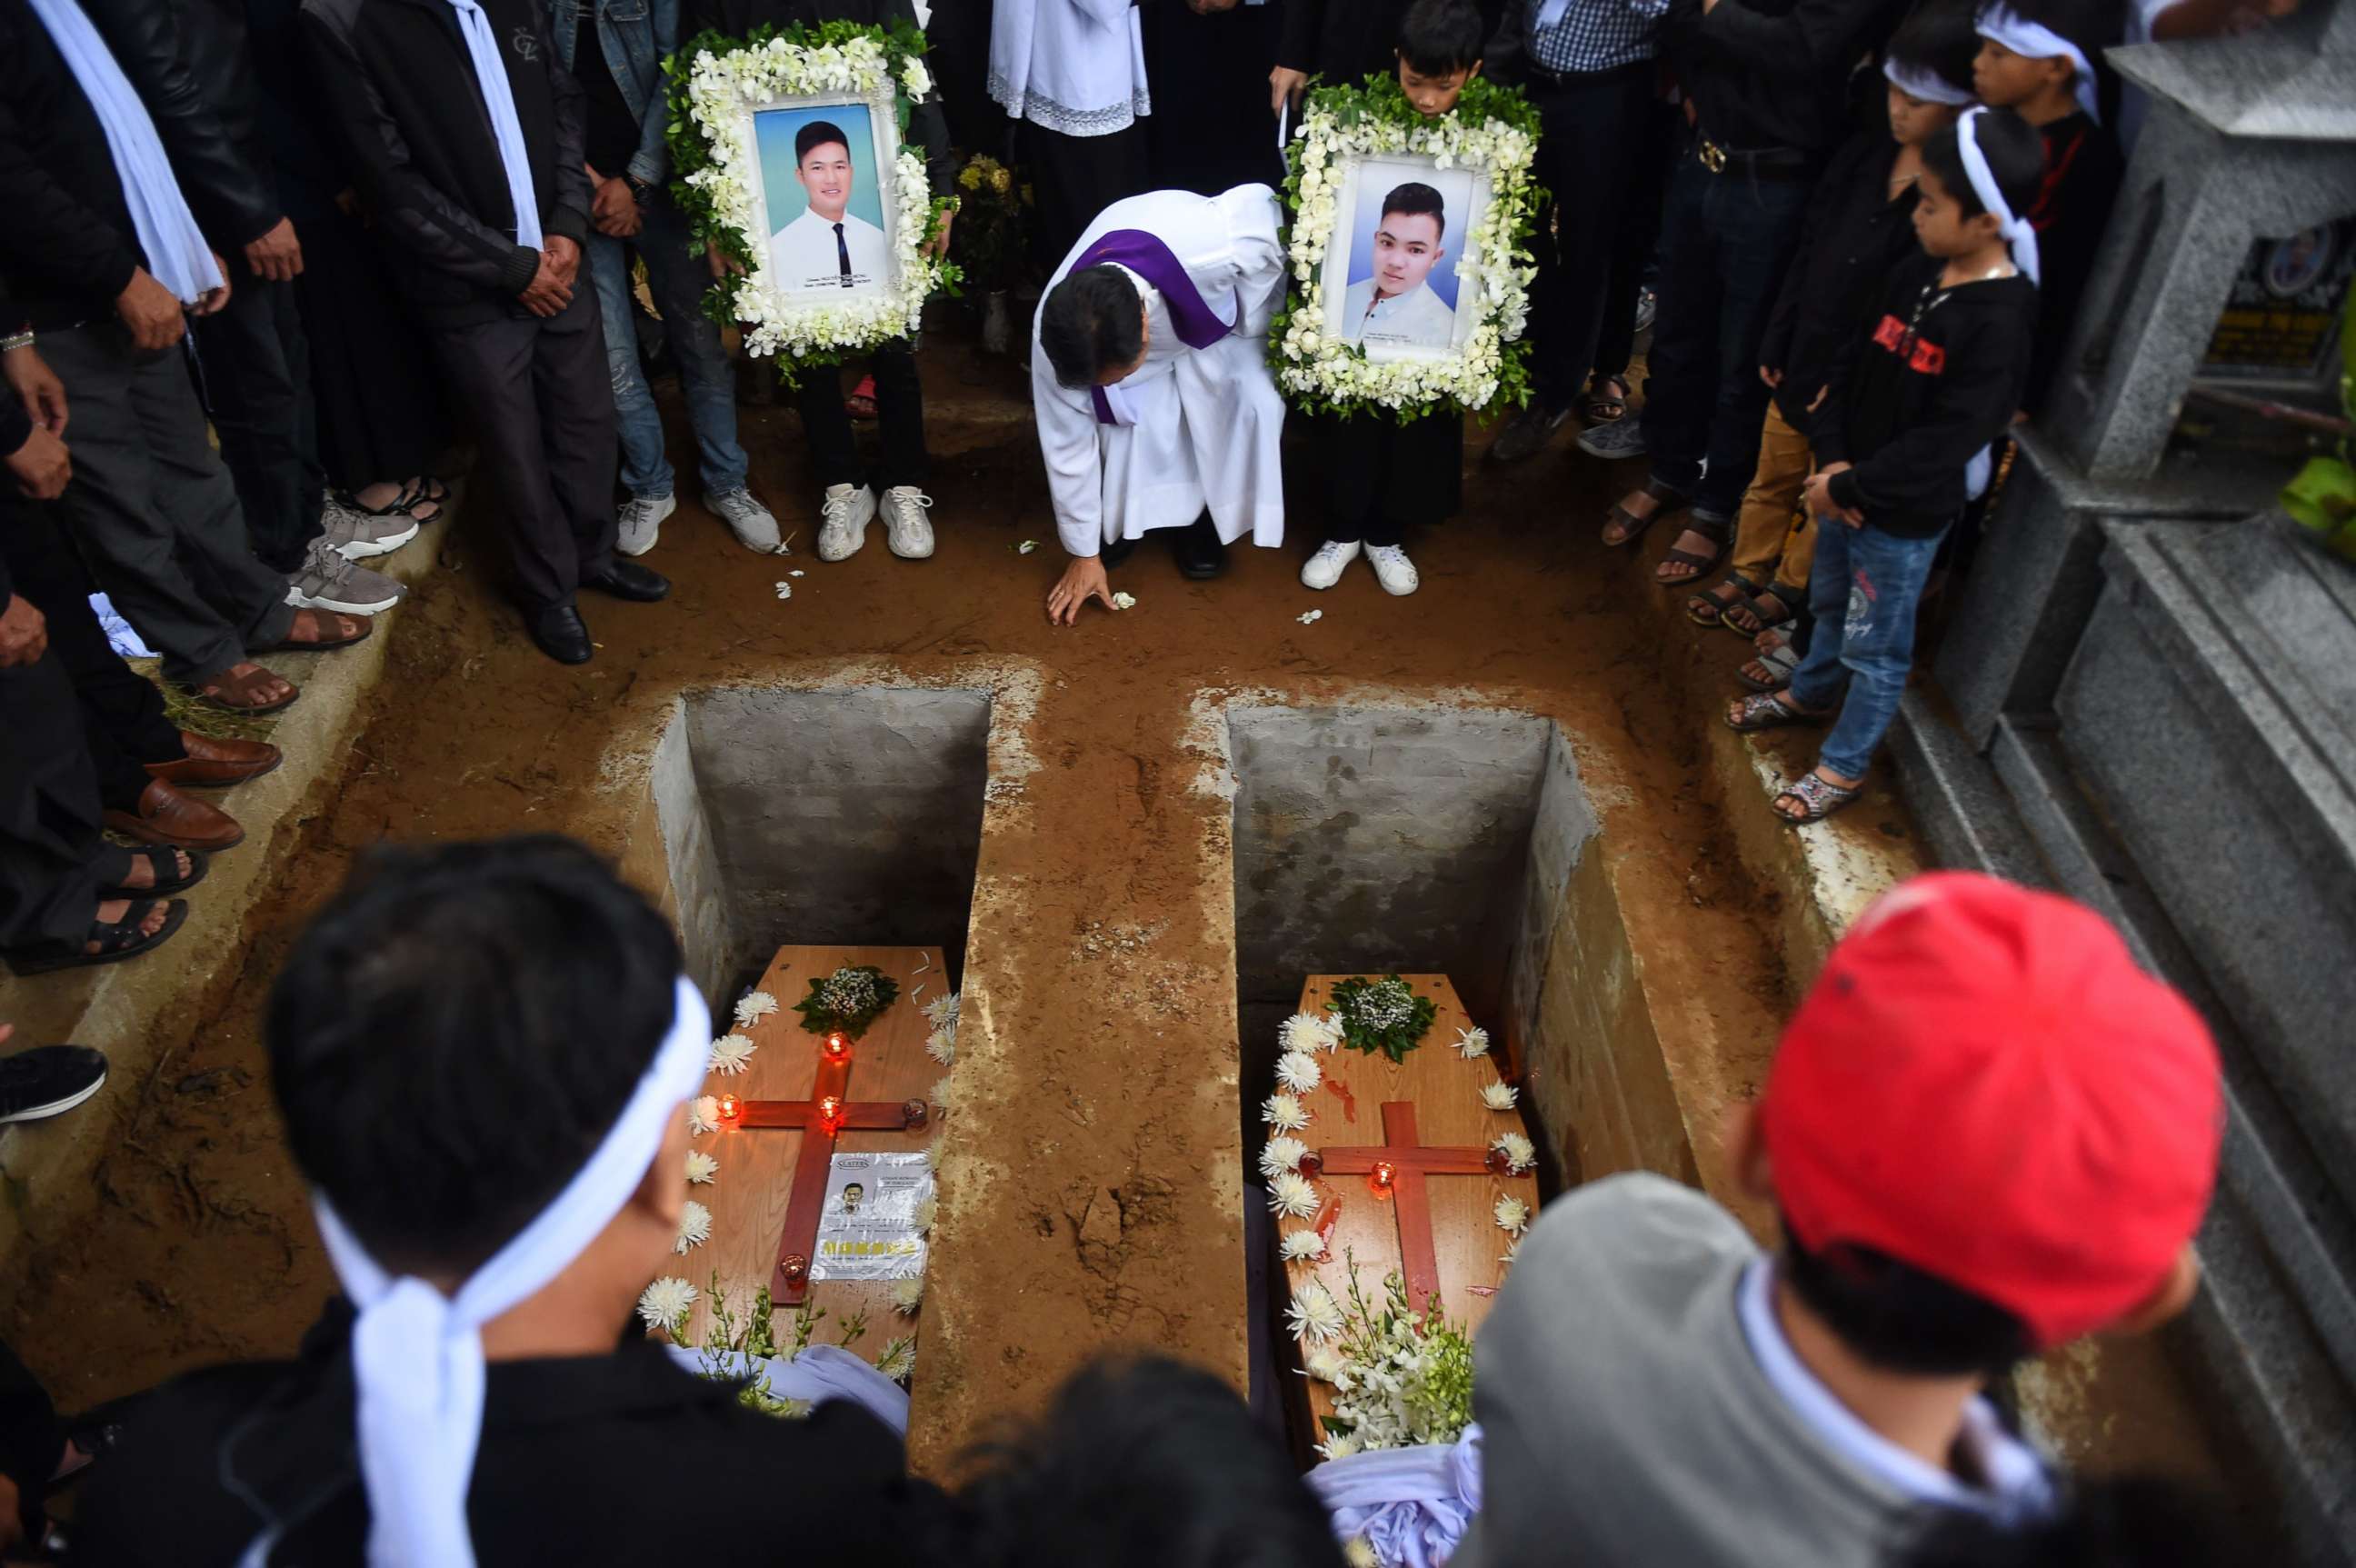 PHOTO: A priest officiates final rites during burial of coffins bearing the remains of two Vietnamese migrants at a cemetery in Dien Chau district, Nghe An province on Nov. 28, 2019.